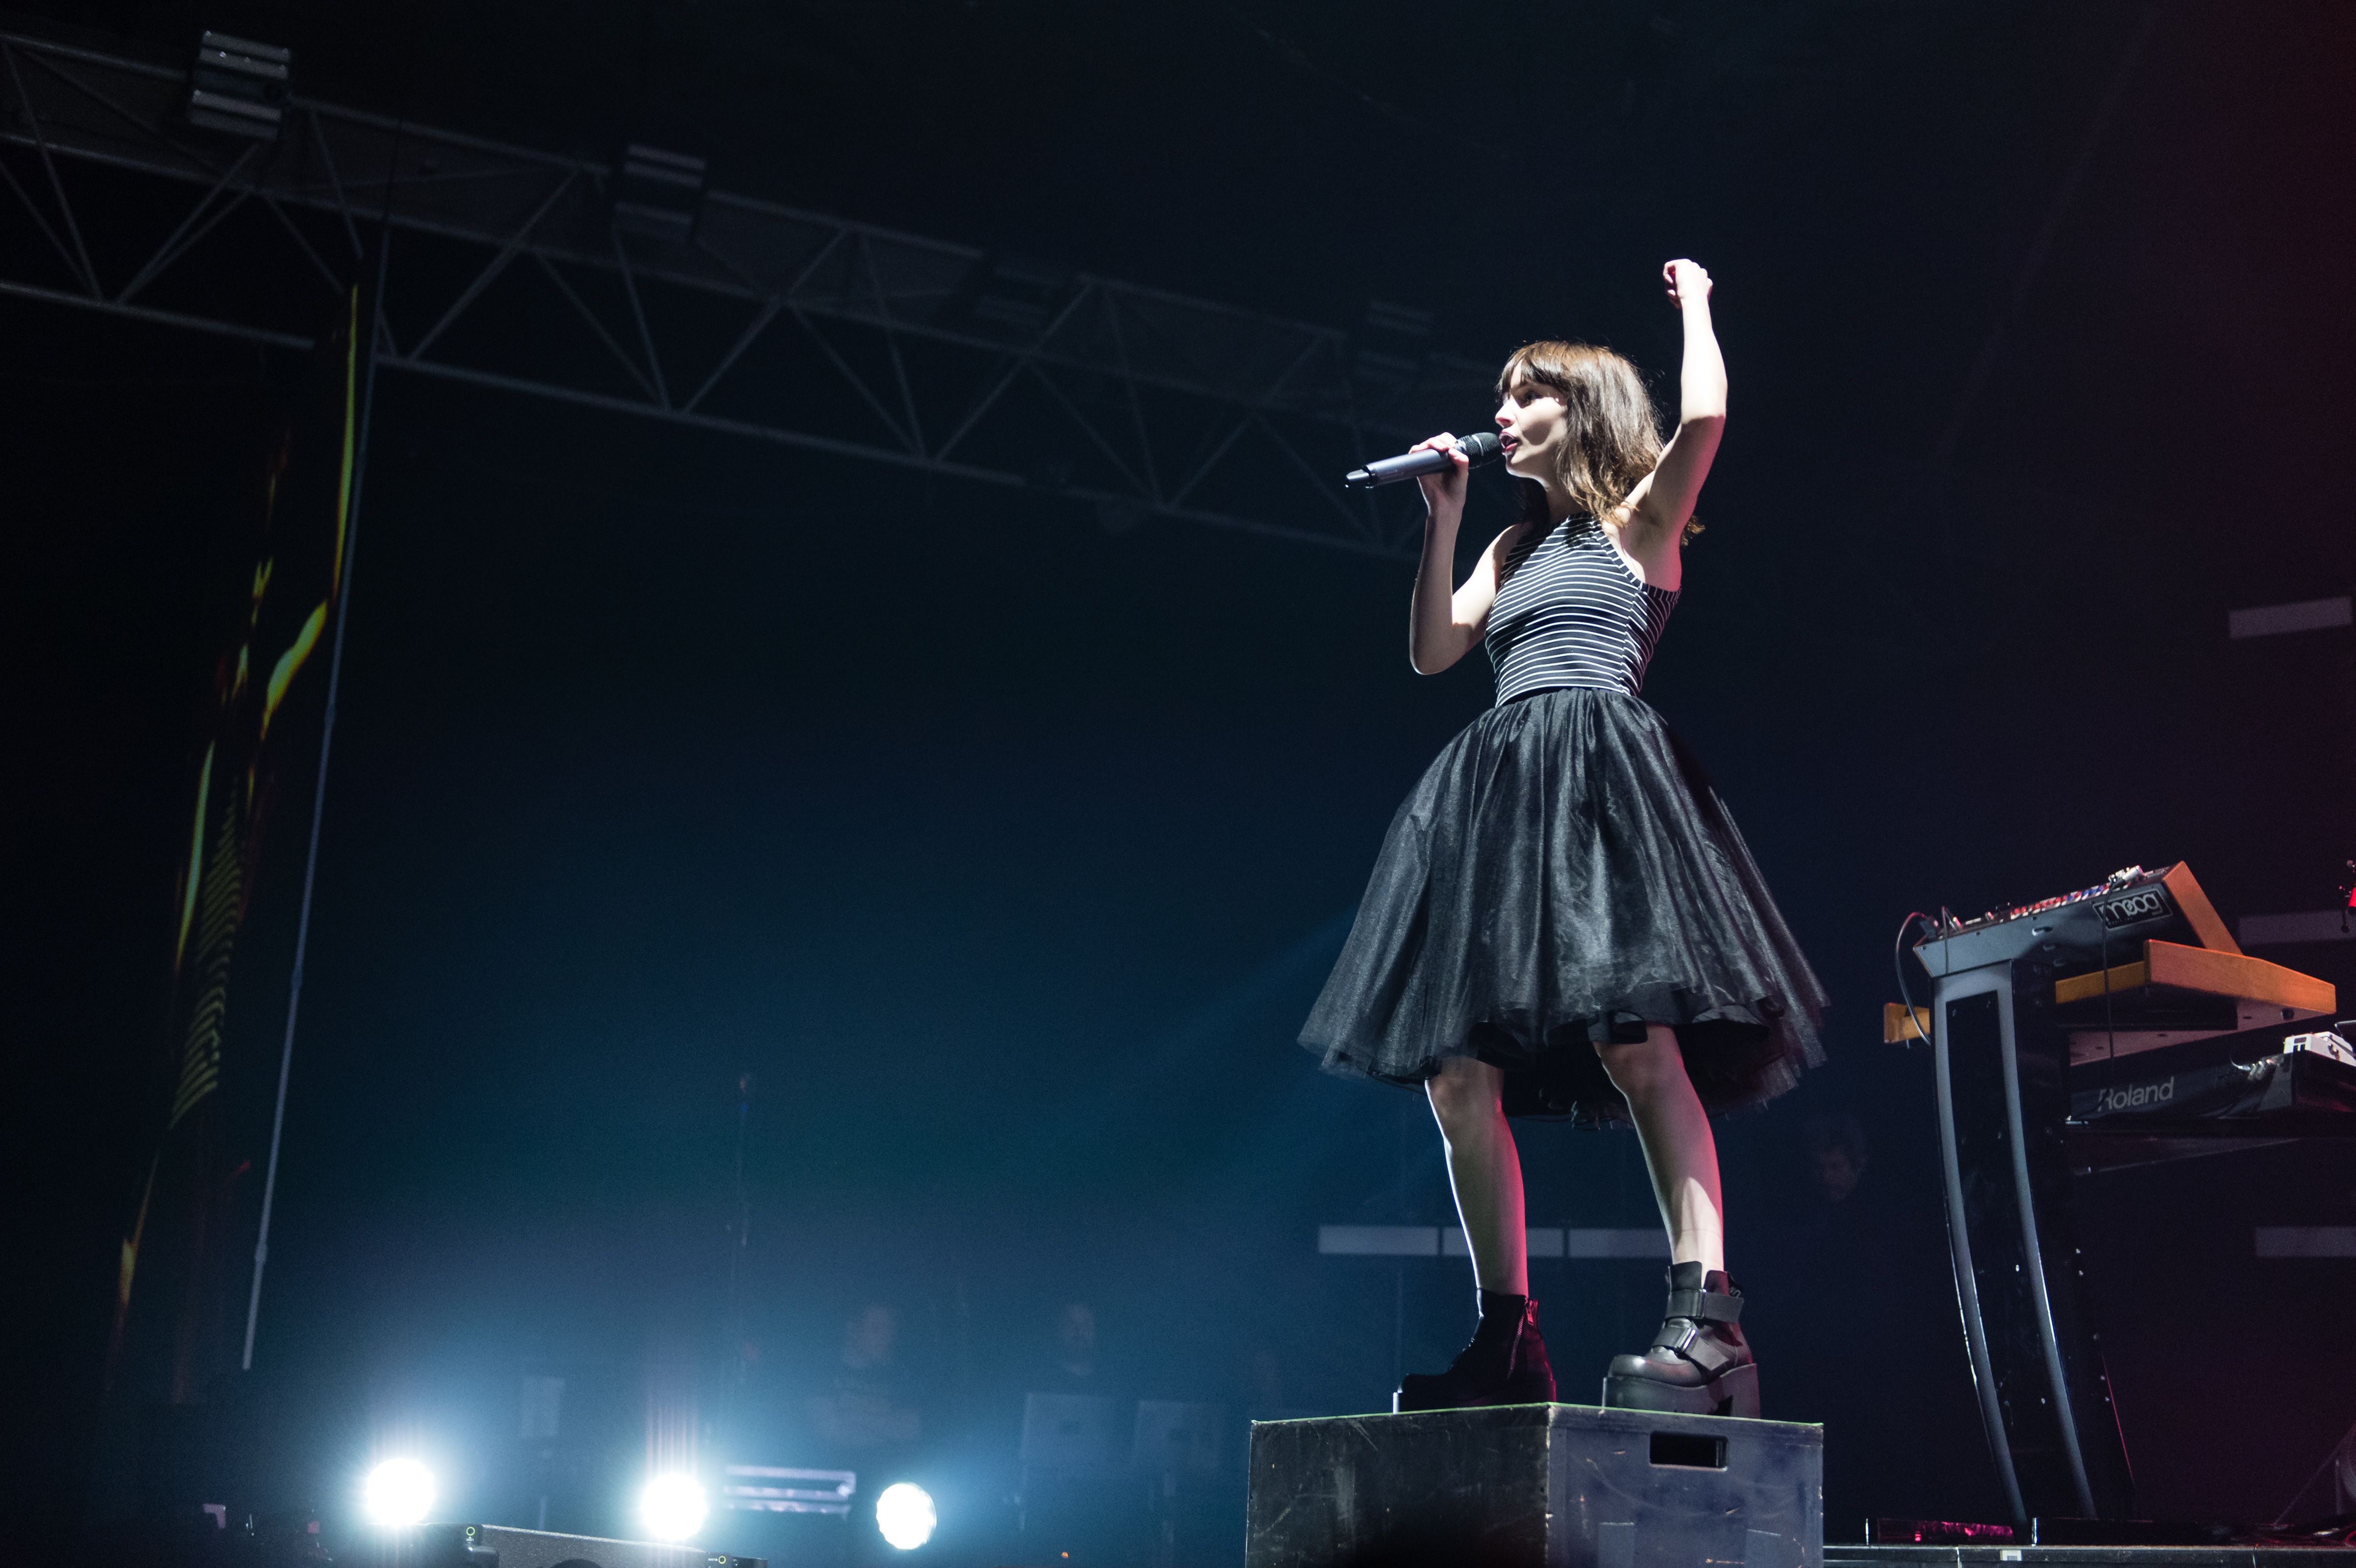 Chvrches 4k Ultra HD Wallpaper Background Image Id